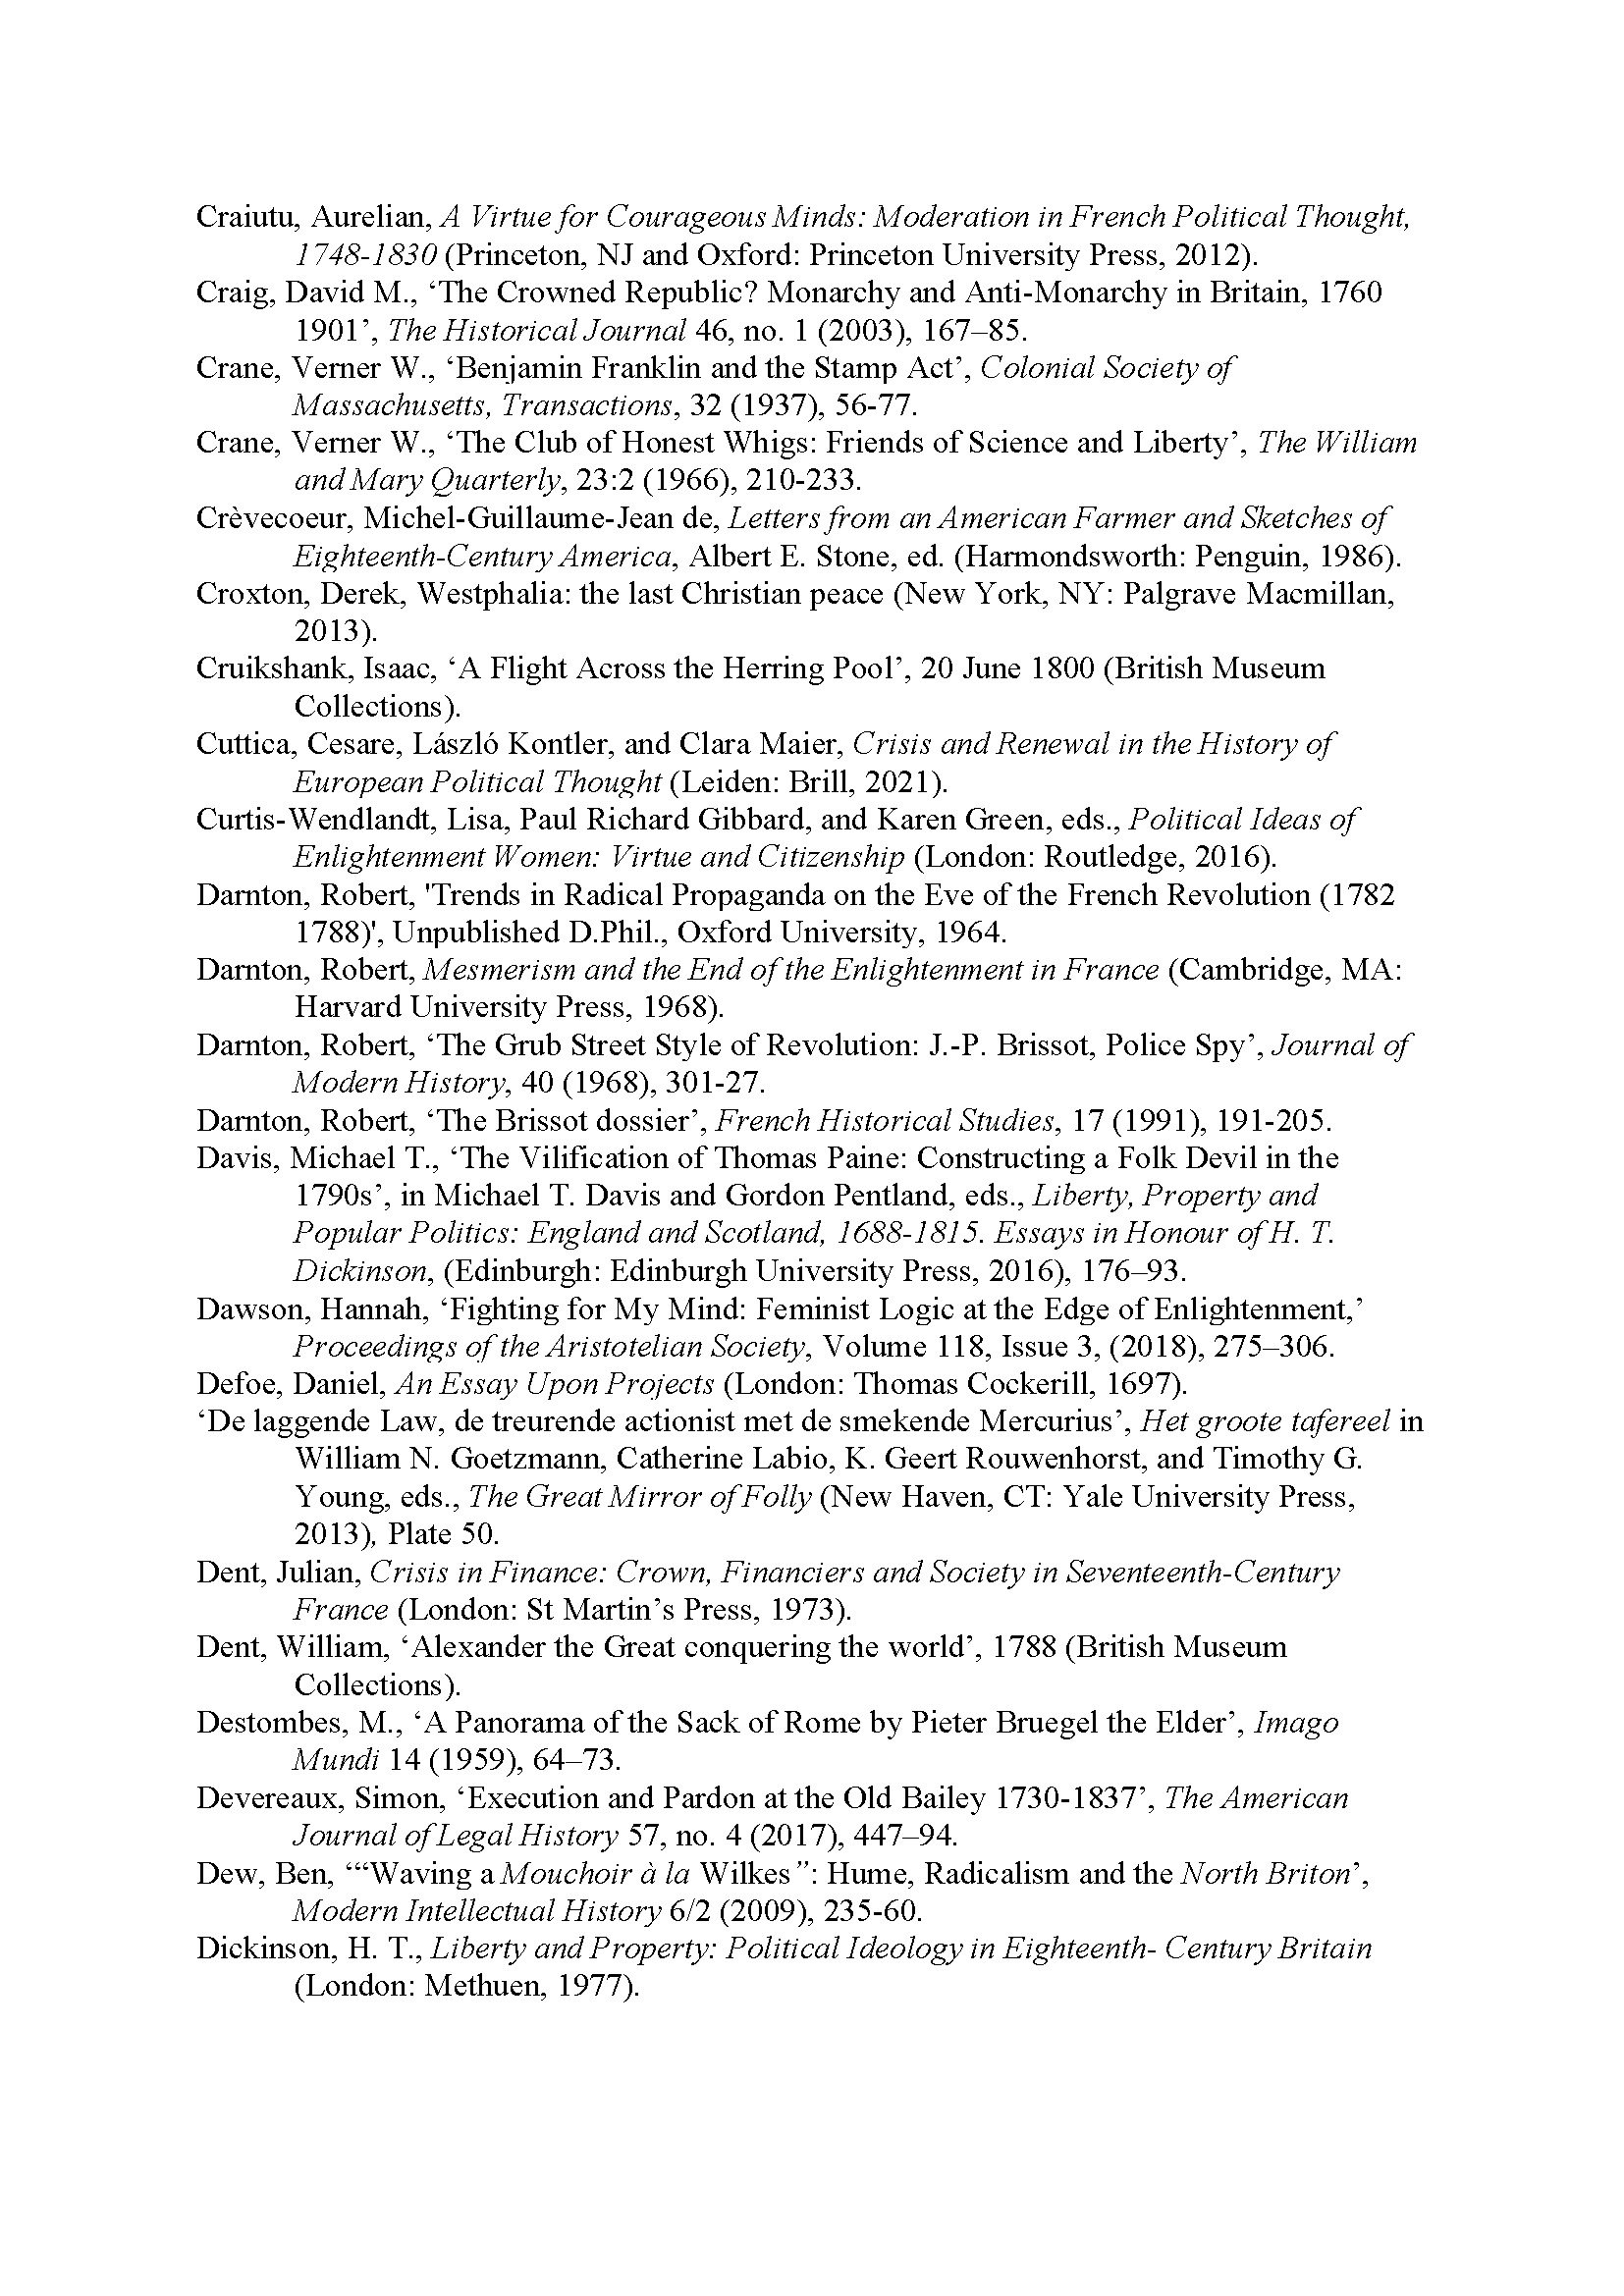 End of the Enlightment_Bibliography[25]_Page_12.jpg